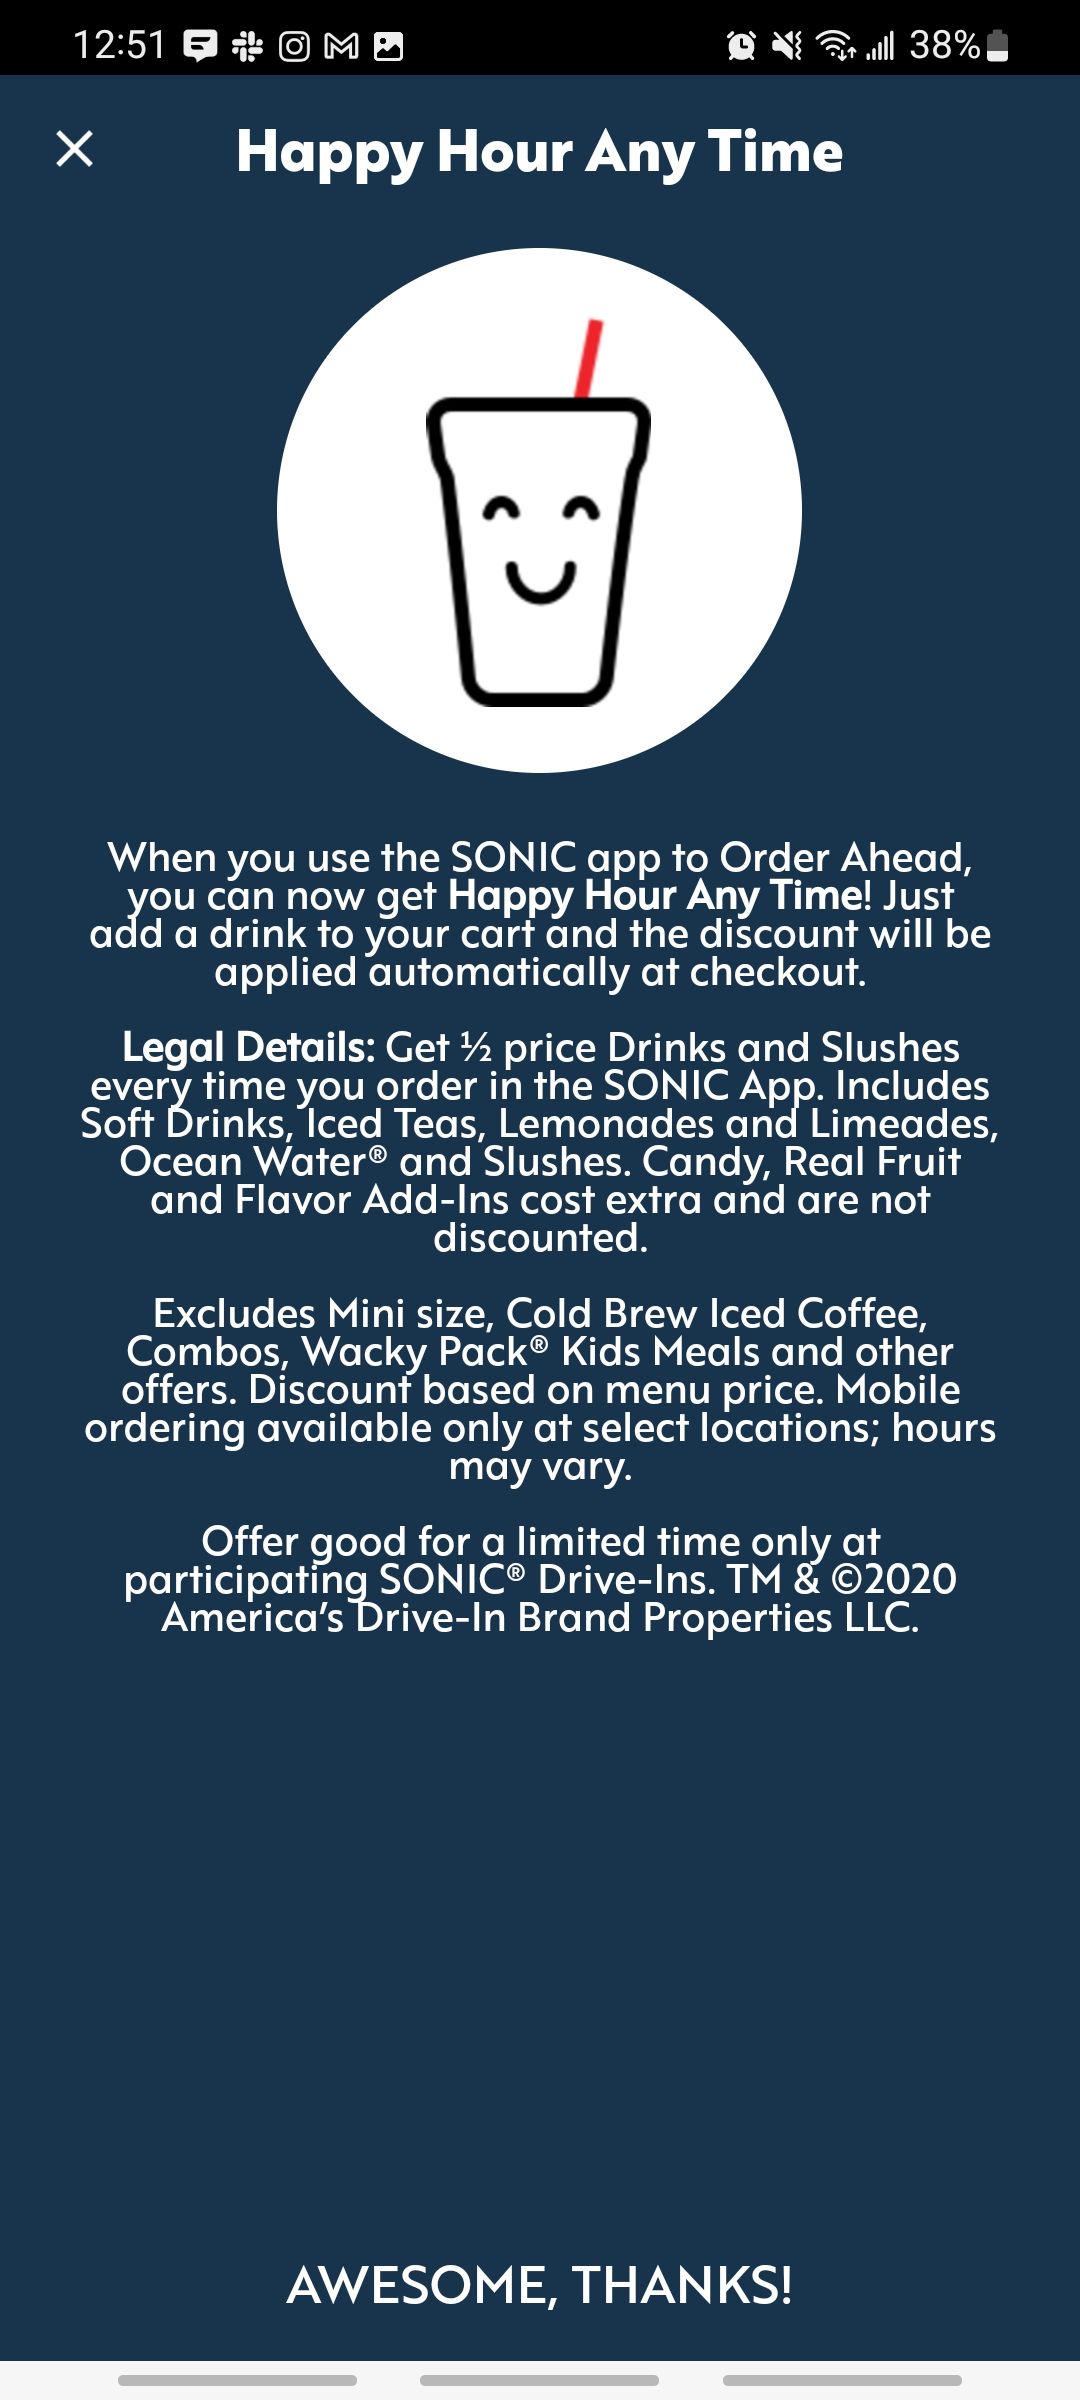 sonic app half price drinks all day explained